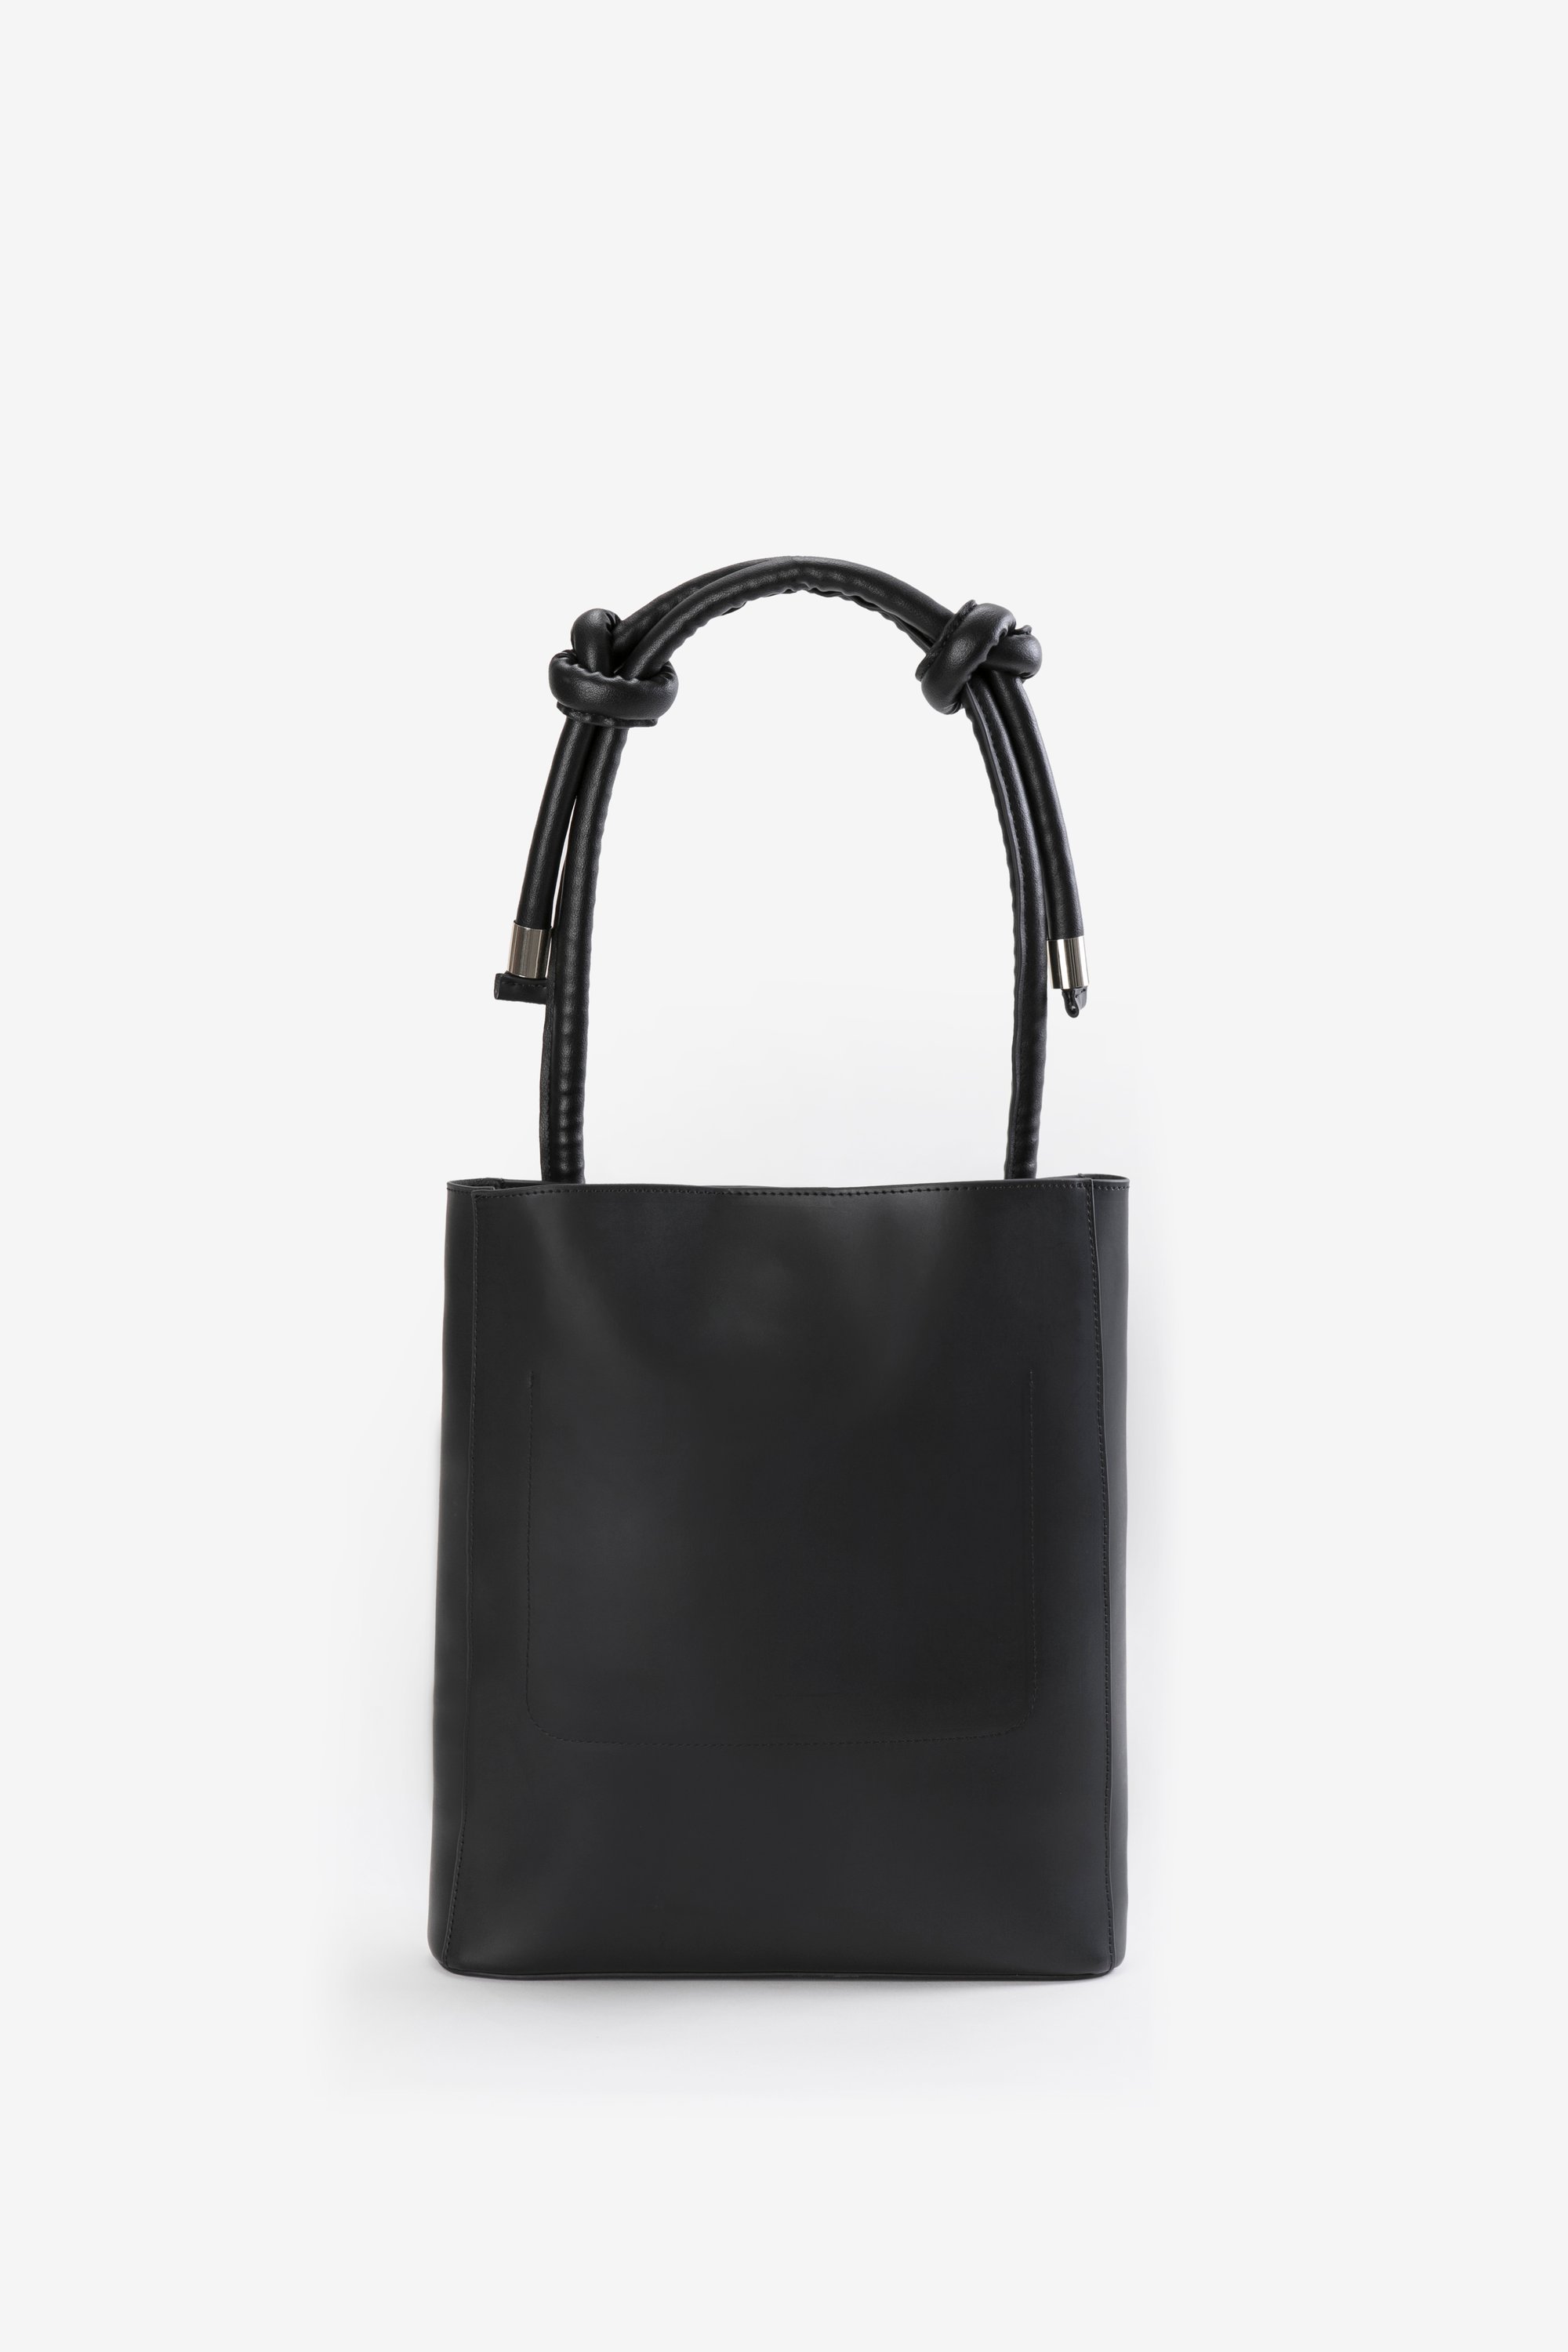 Image of ZOEE 2 ways chunky knot charcoal black leather bag with adjustable strap